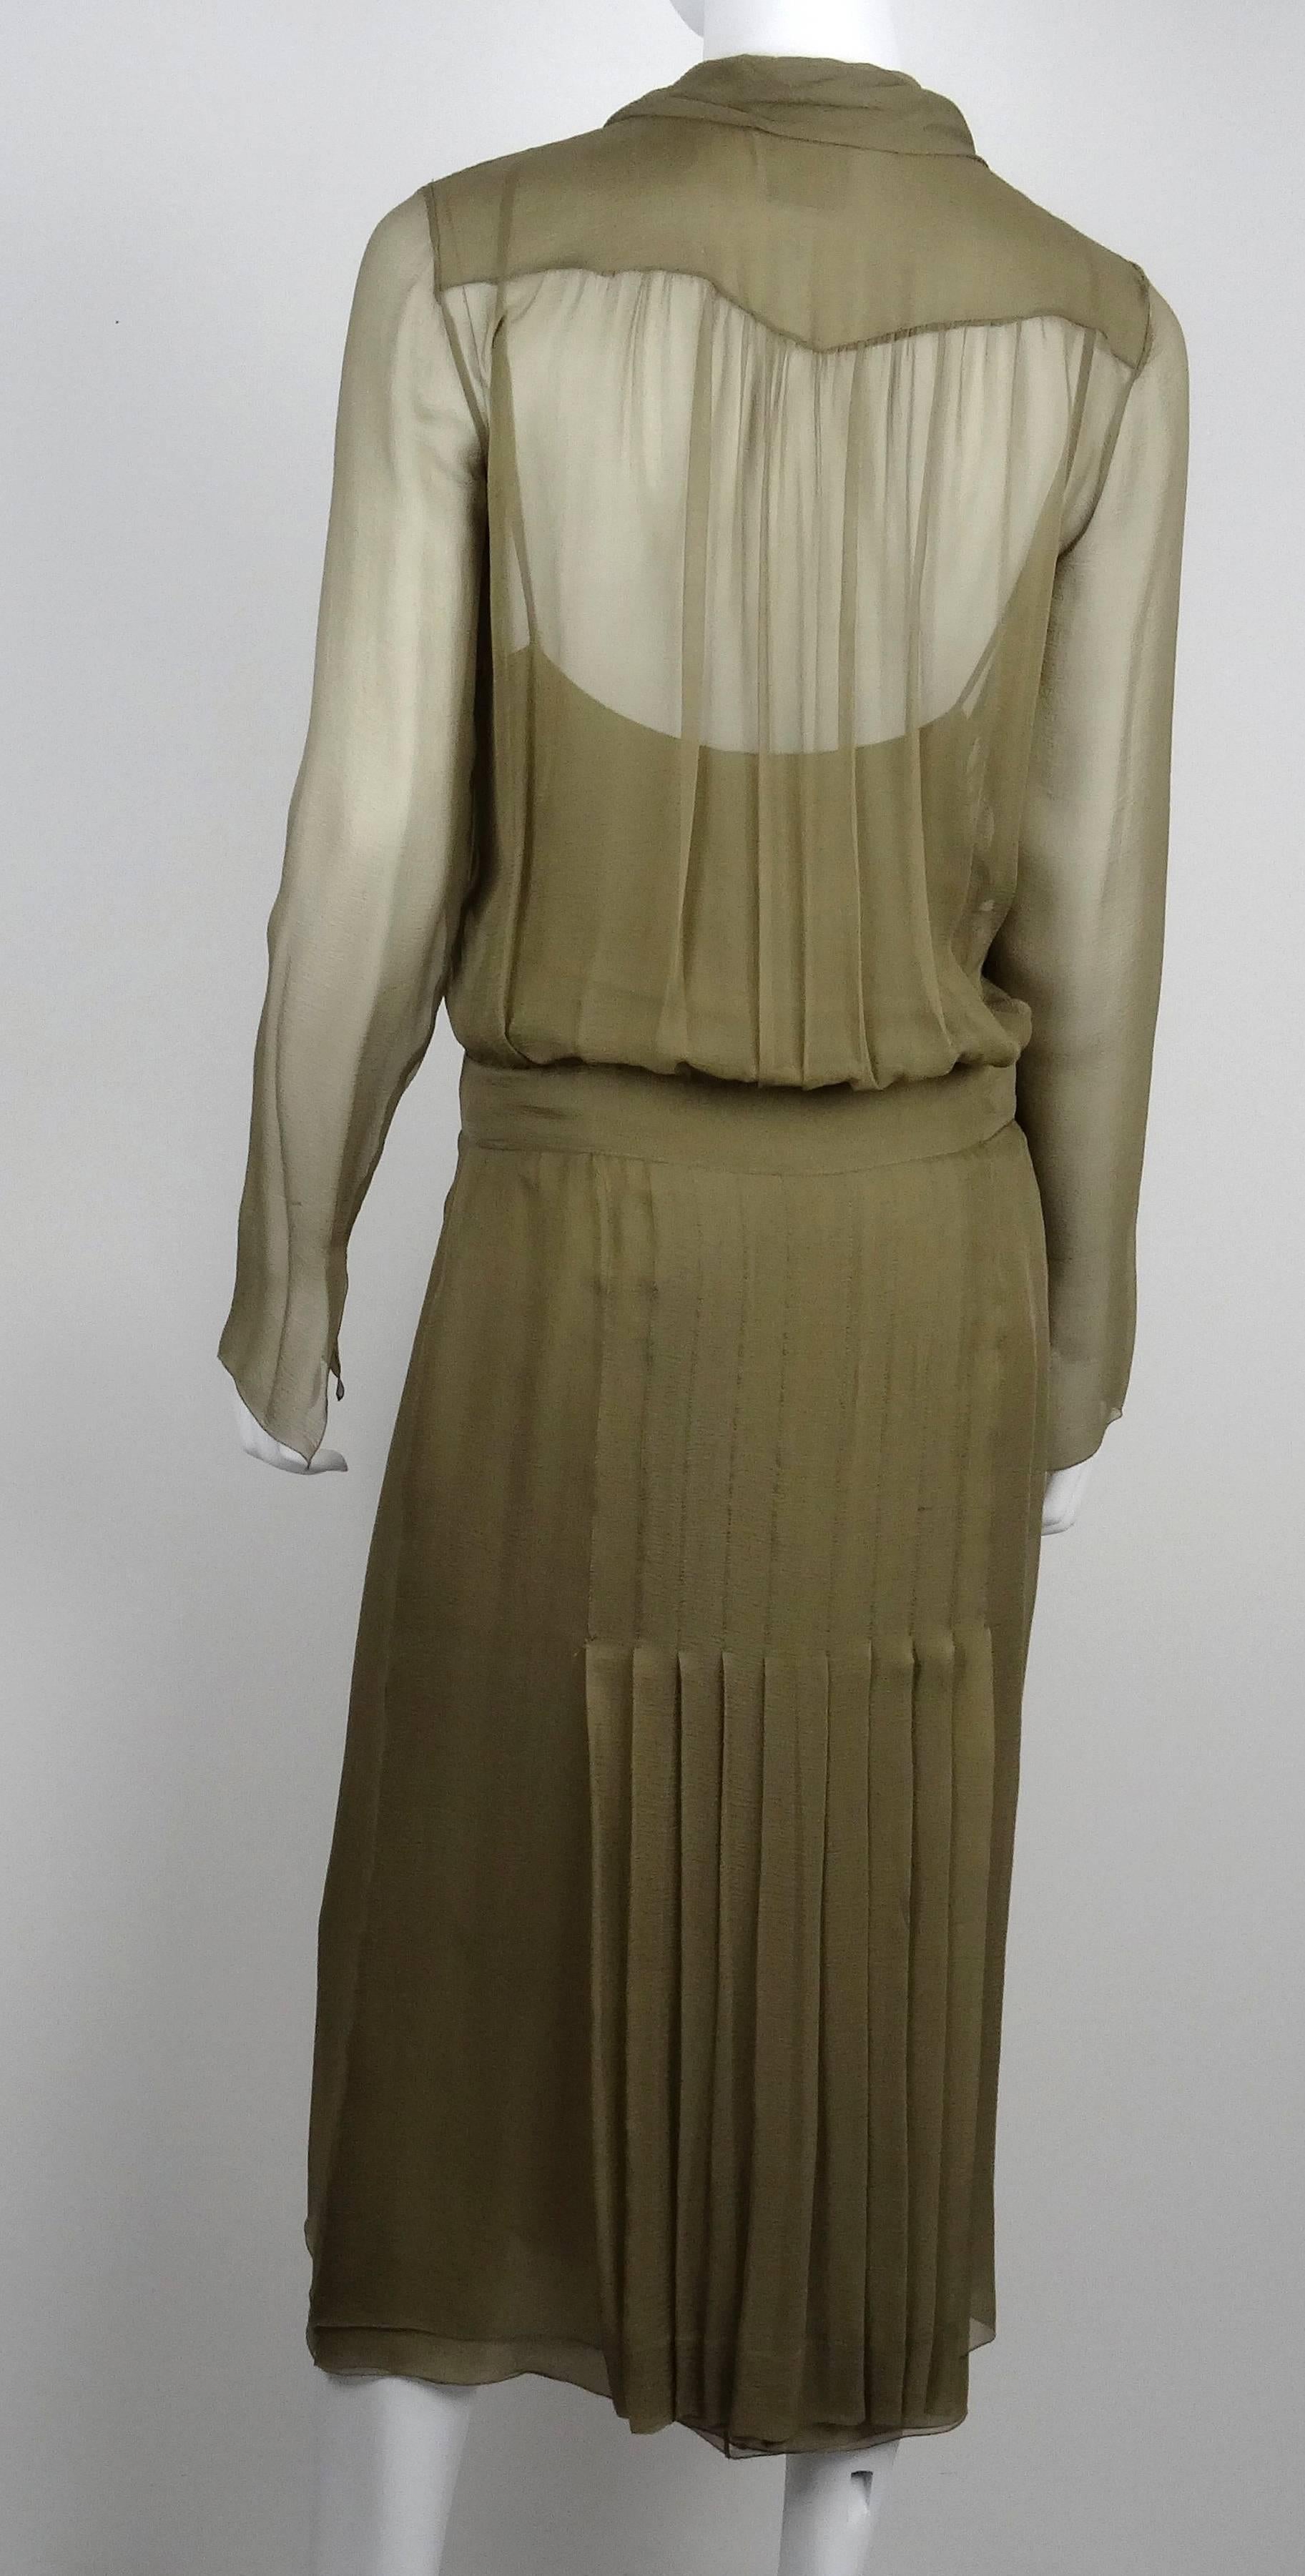 Chanel 2004A Taupe 1920s Style Pleated Sheer Silk 3/4 Length Dress With Bow FR38 In Excellent Condition For Sale In Portland, OR